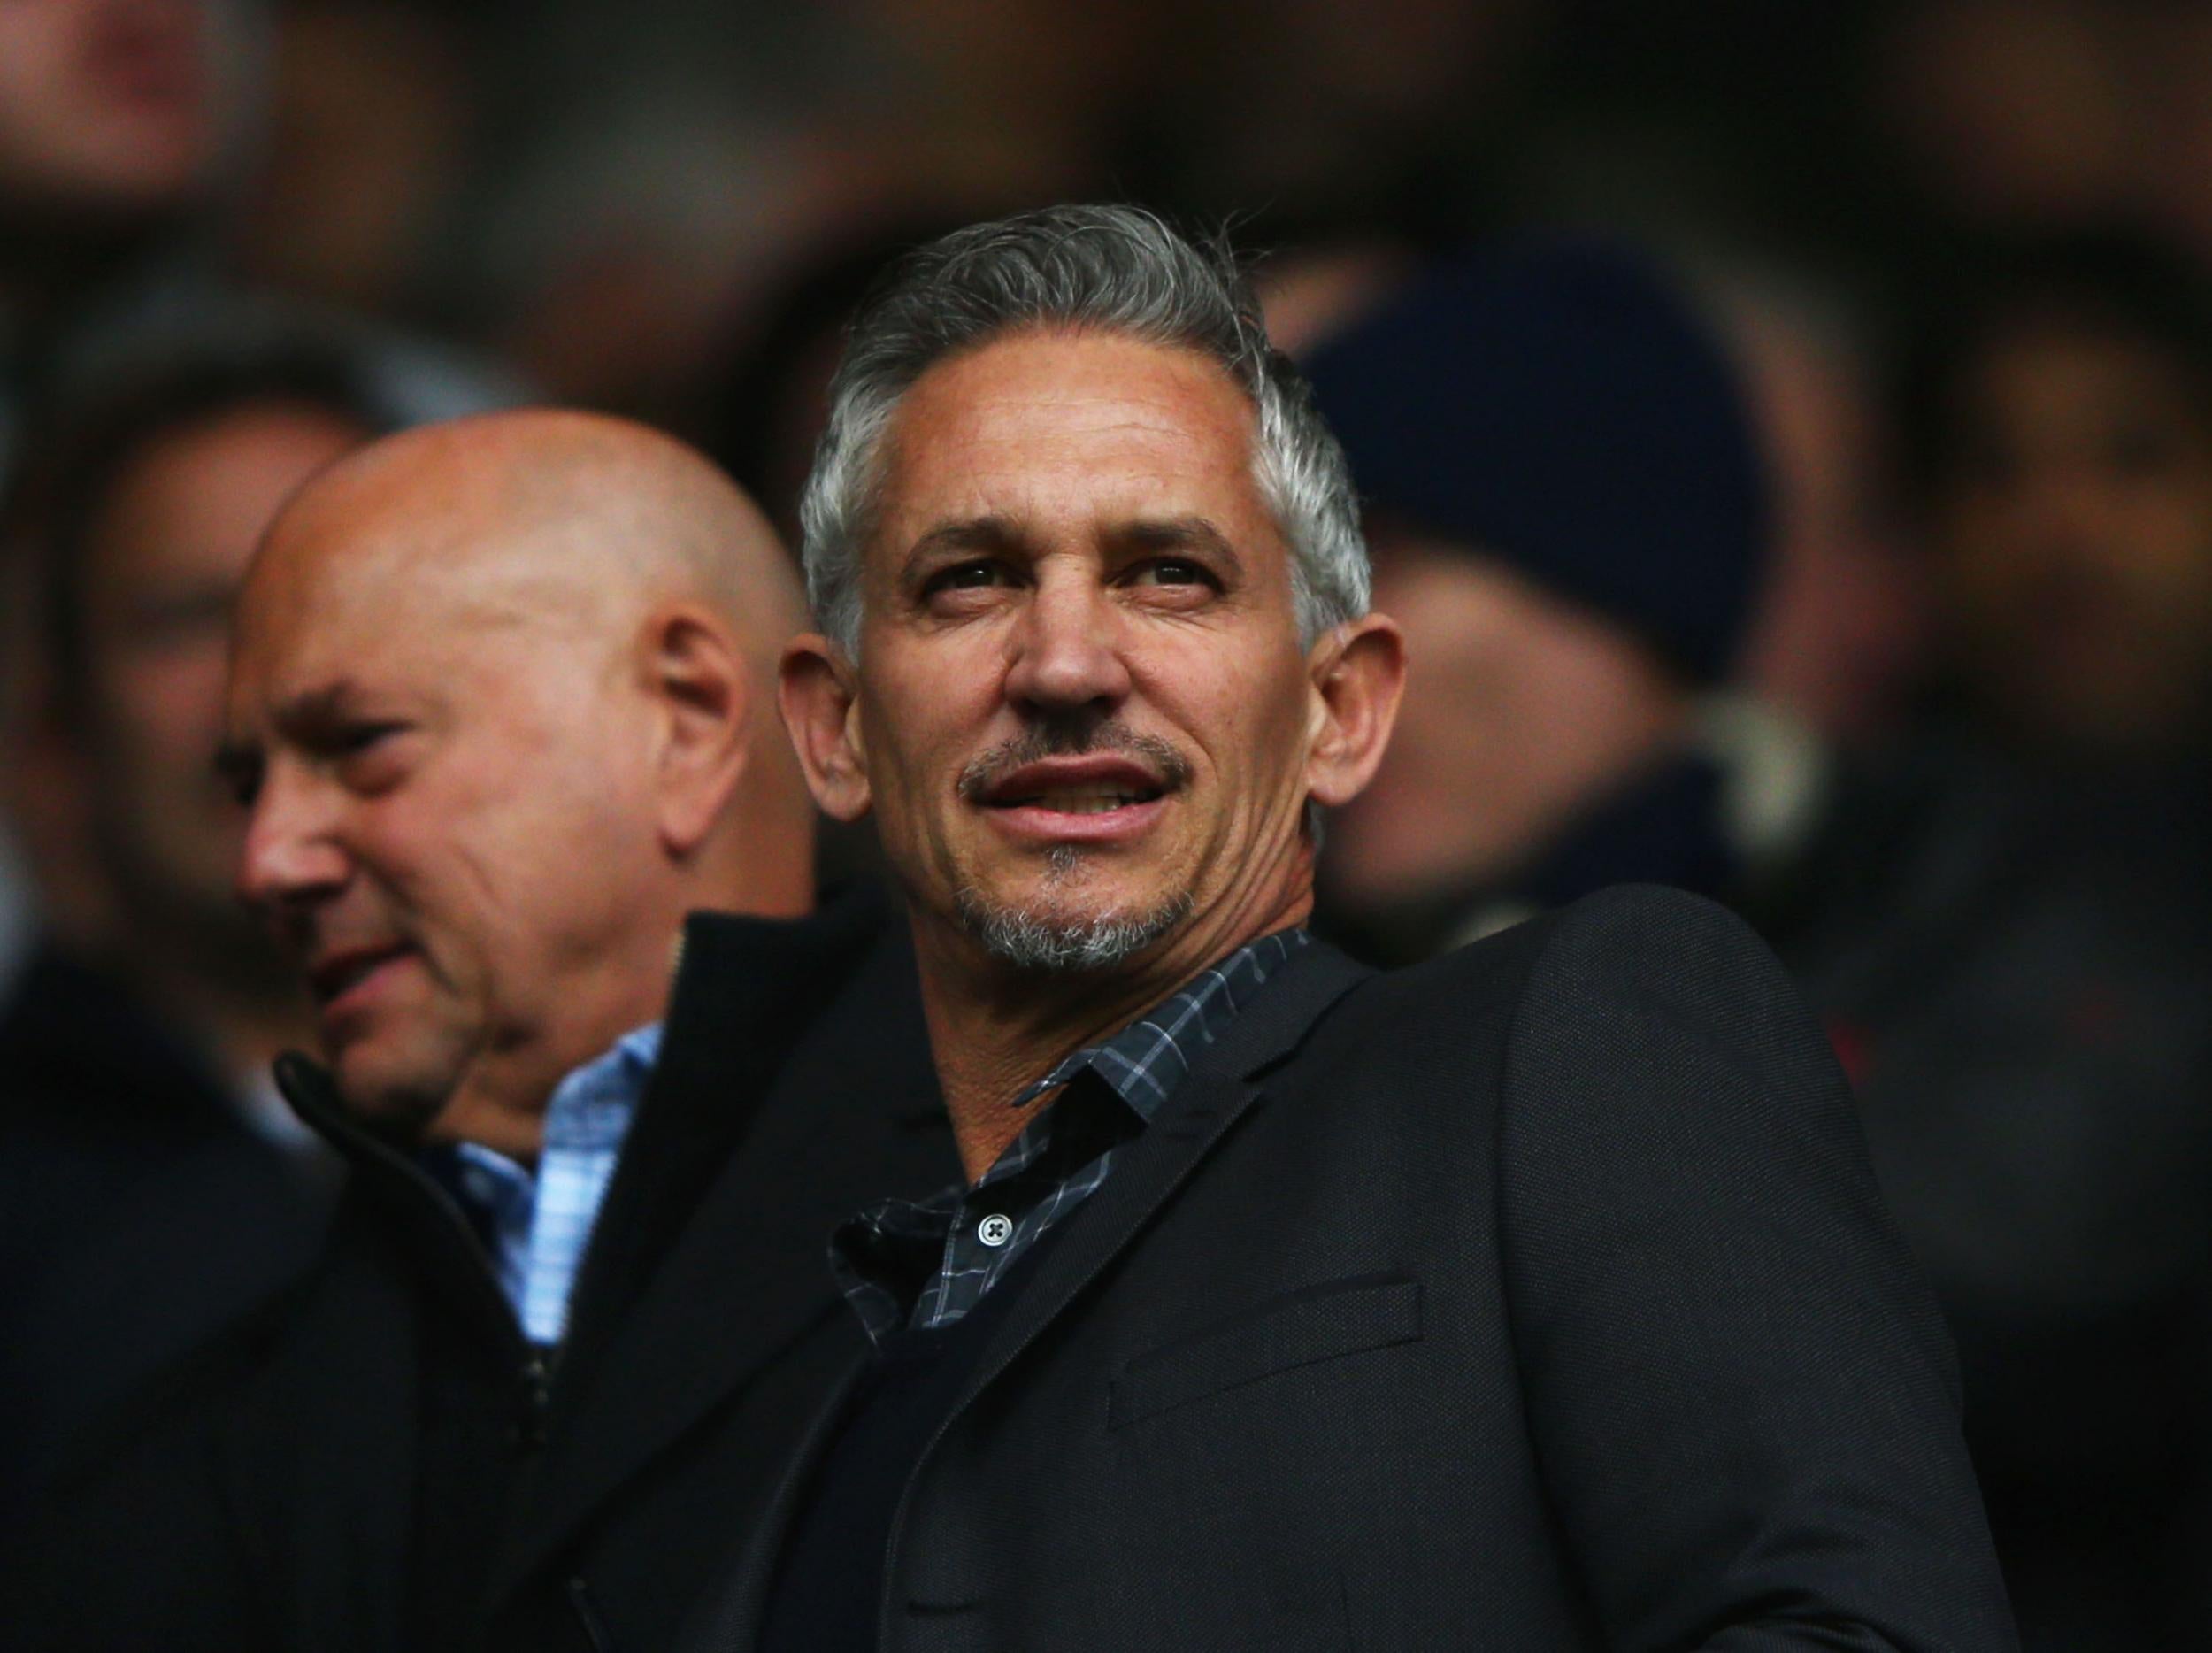 Gary Lineker did not receive a single yellow card in his whole career